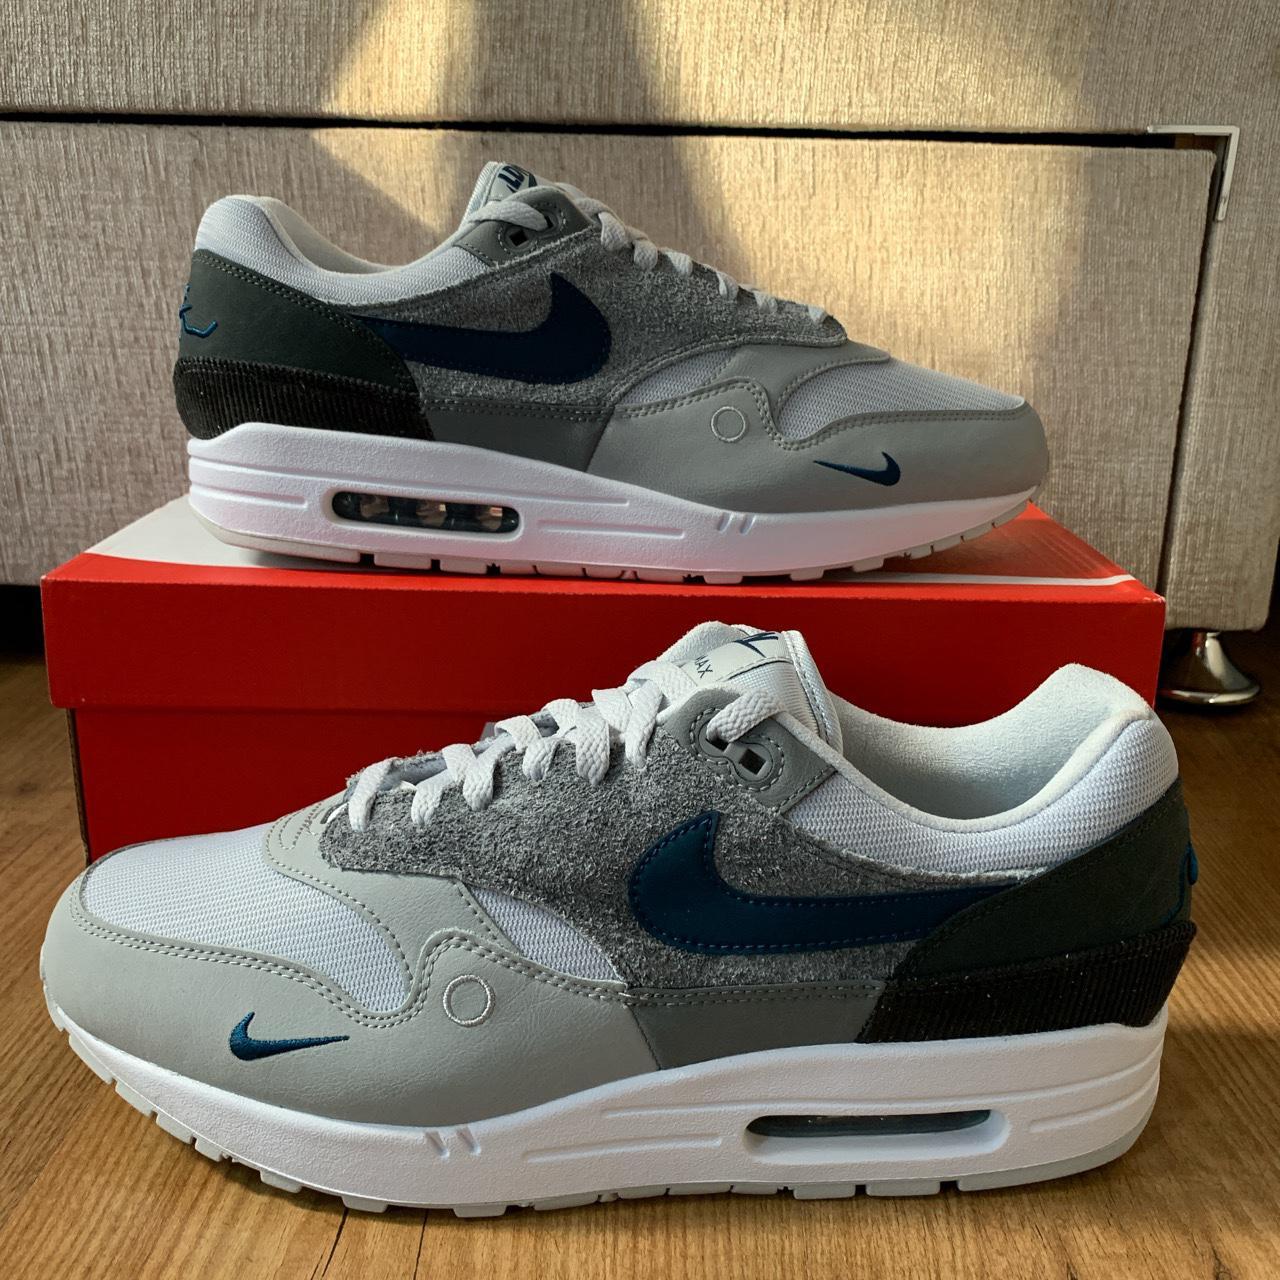 Product Image 2 - Nike Air max 1 ‘London’
Dead